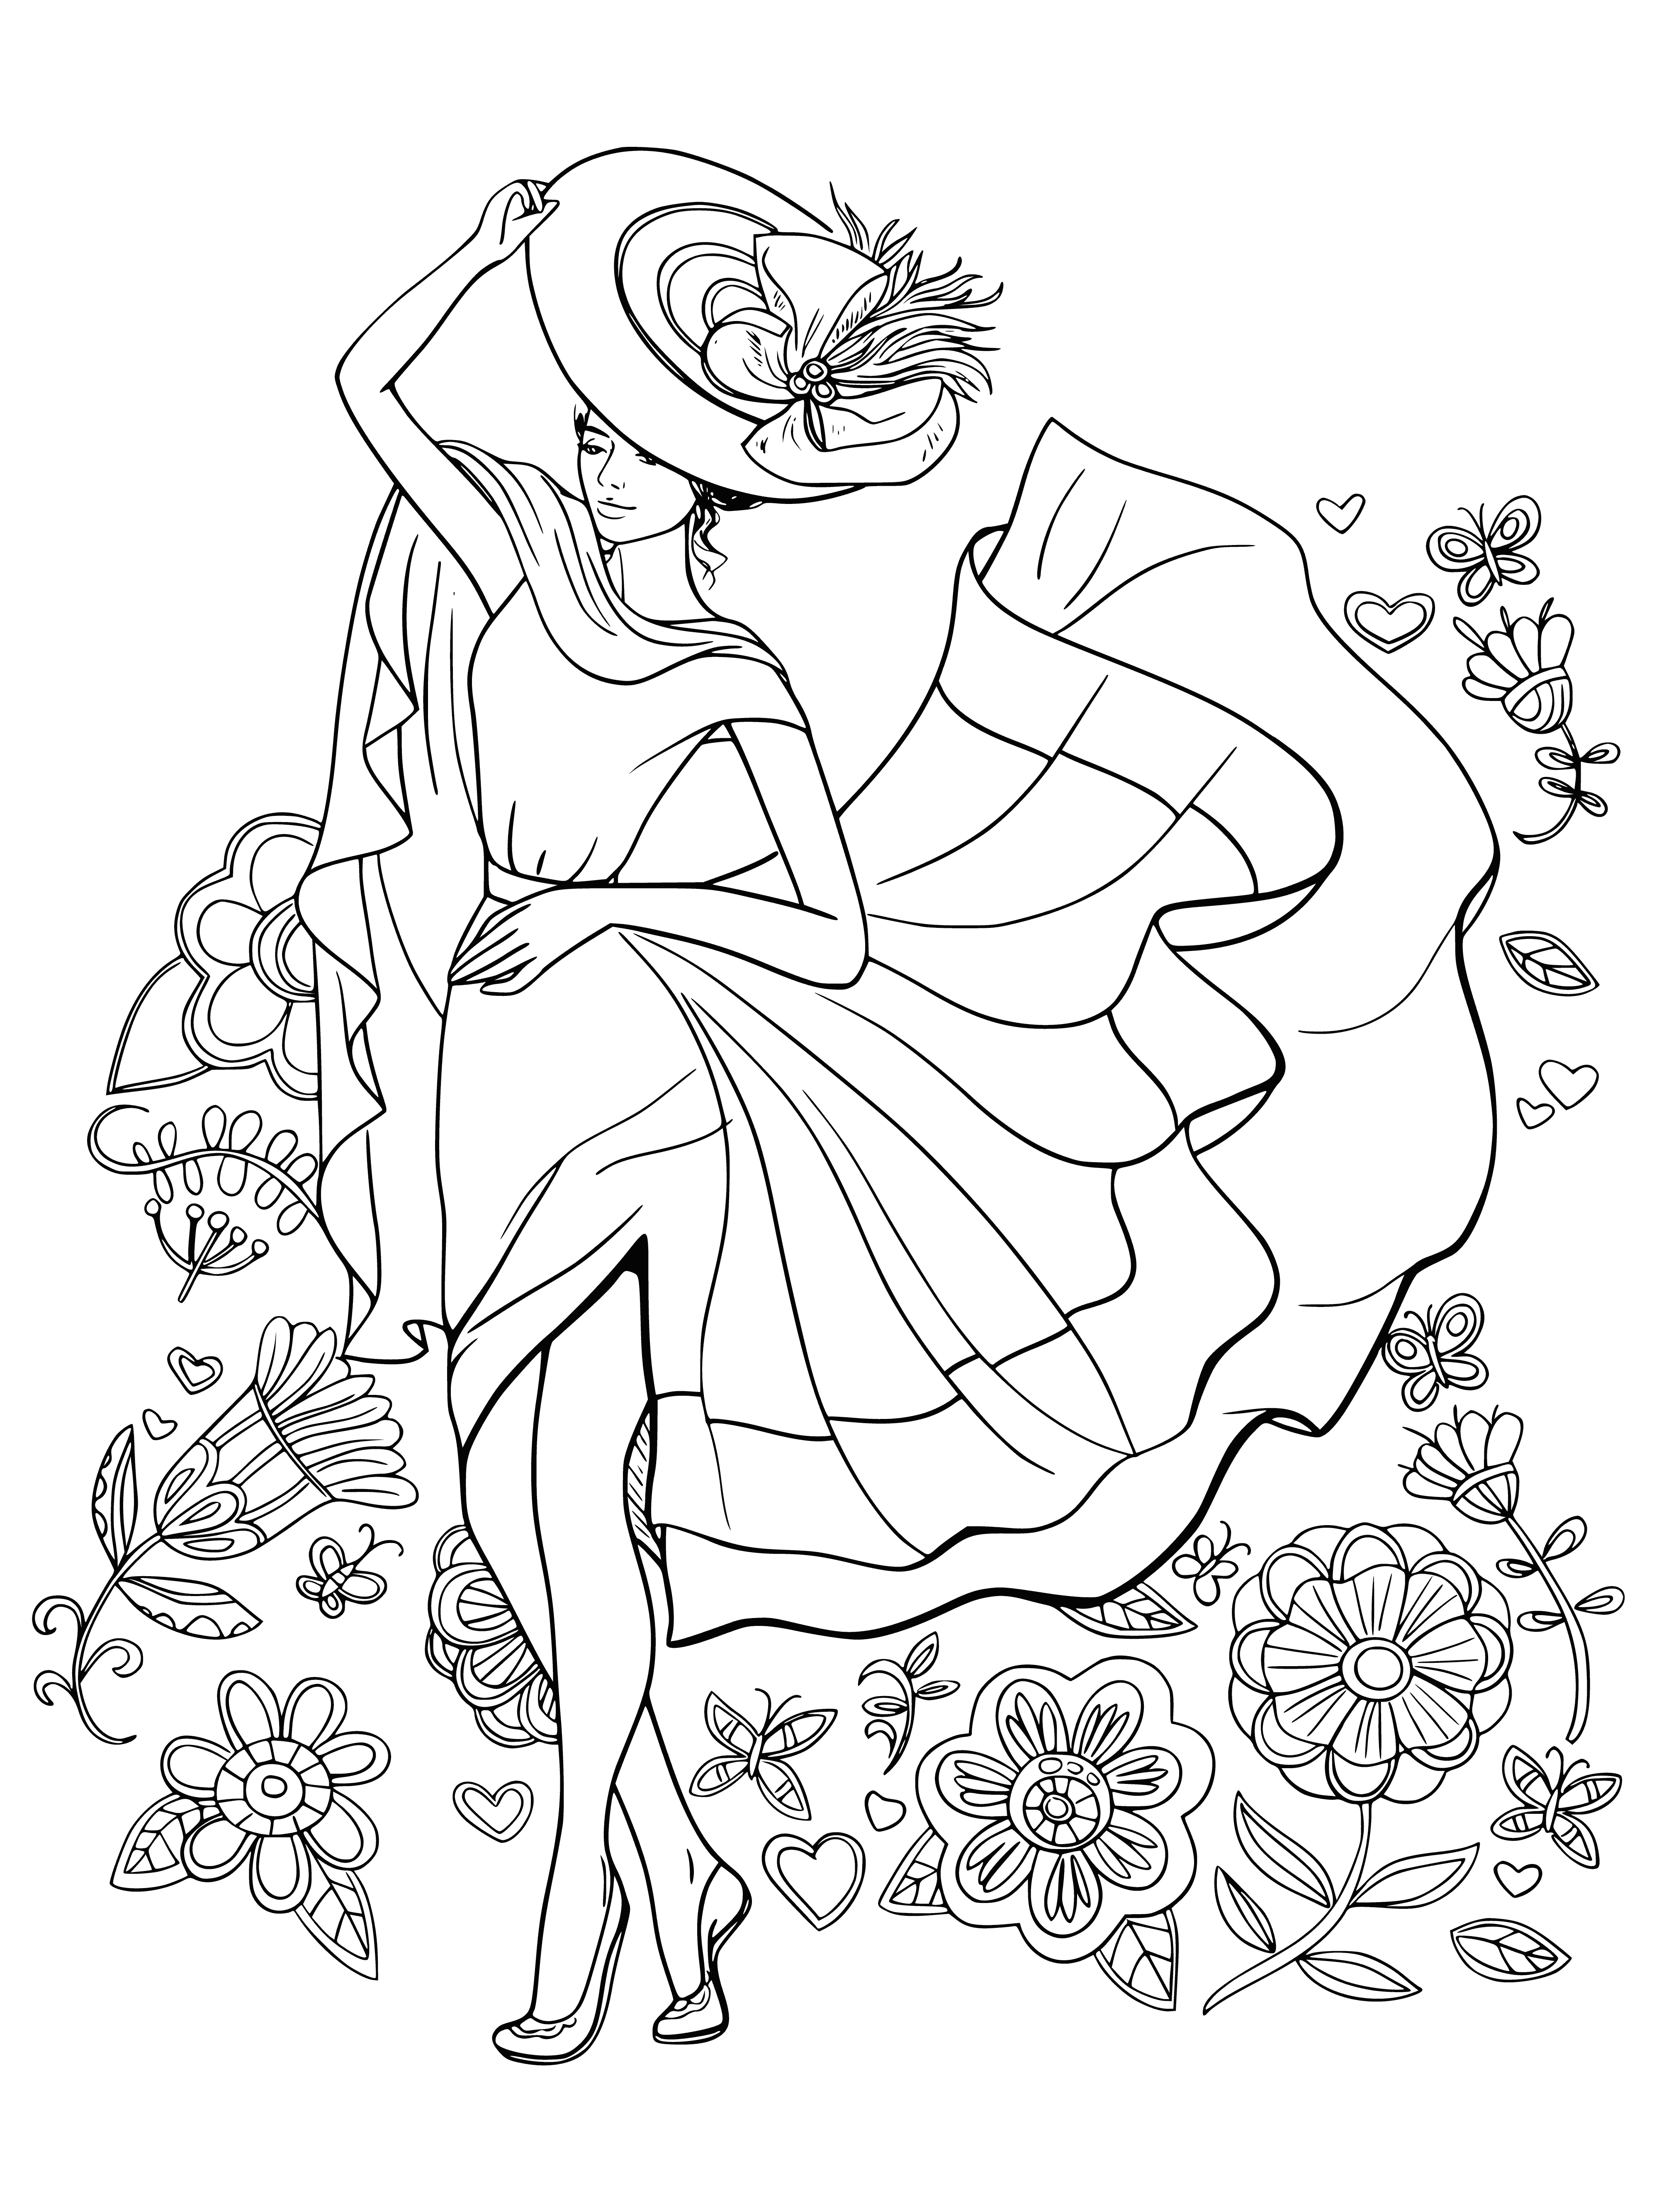 coloring page: Calm, serene drawing of woman in flowing dress w/ large brimmed hat; background of intricate flowers, vines & leaves - perfect for de-stressing.